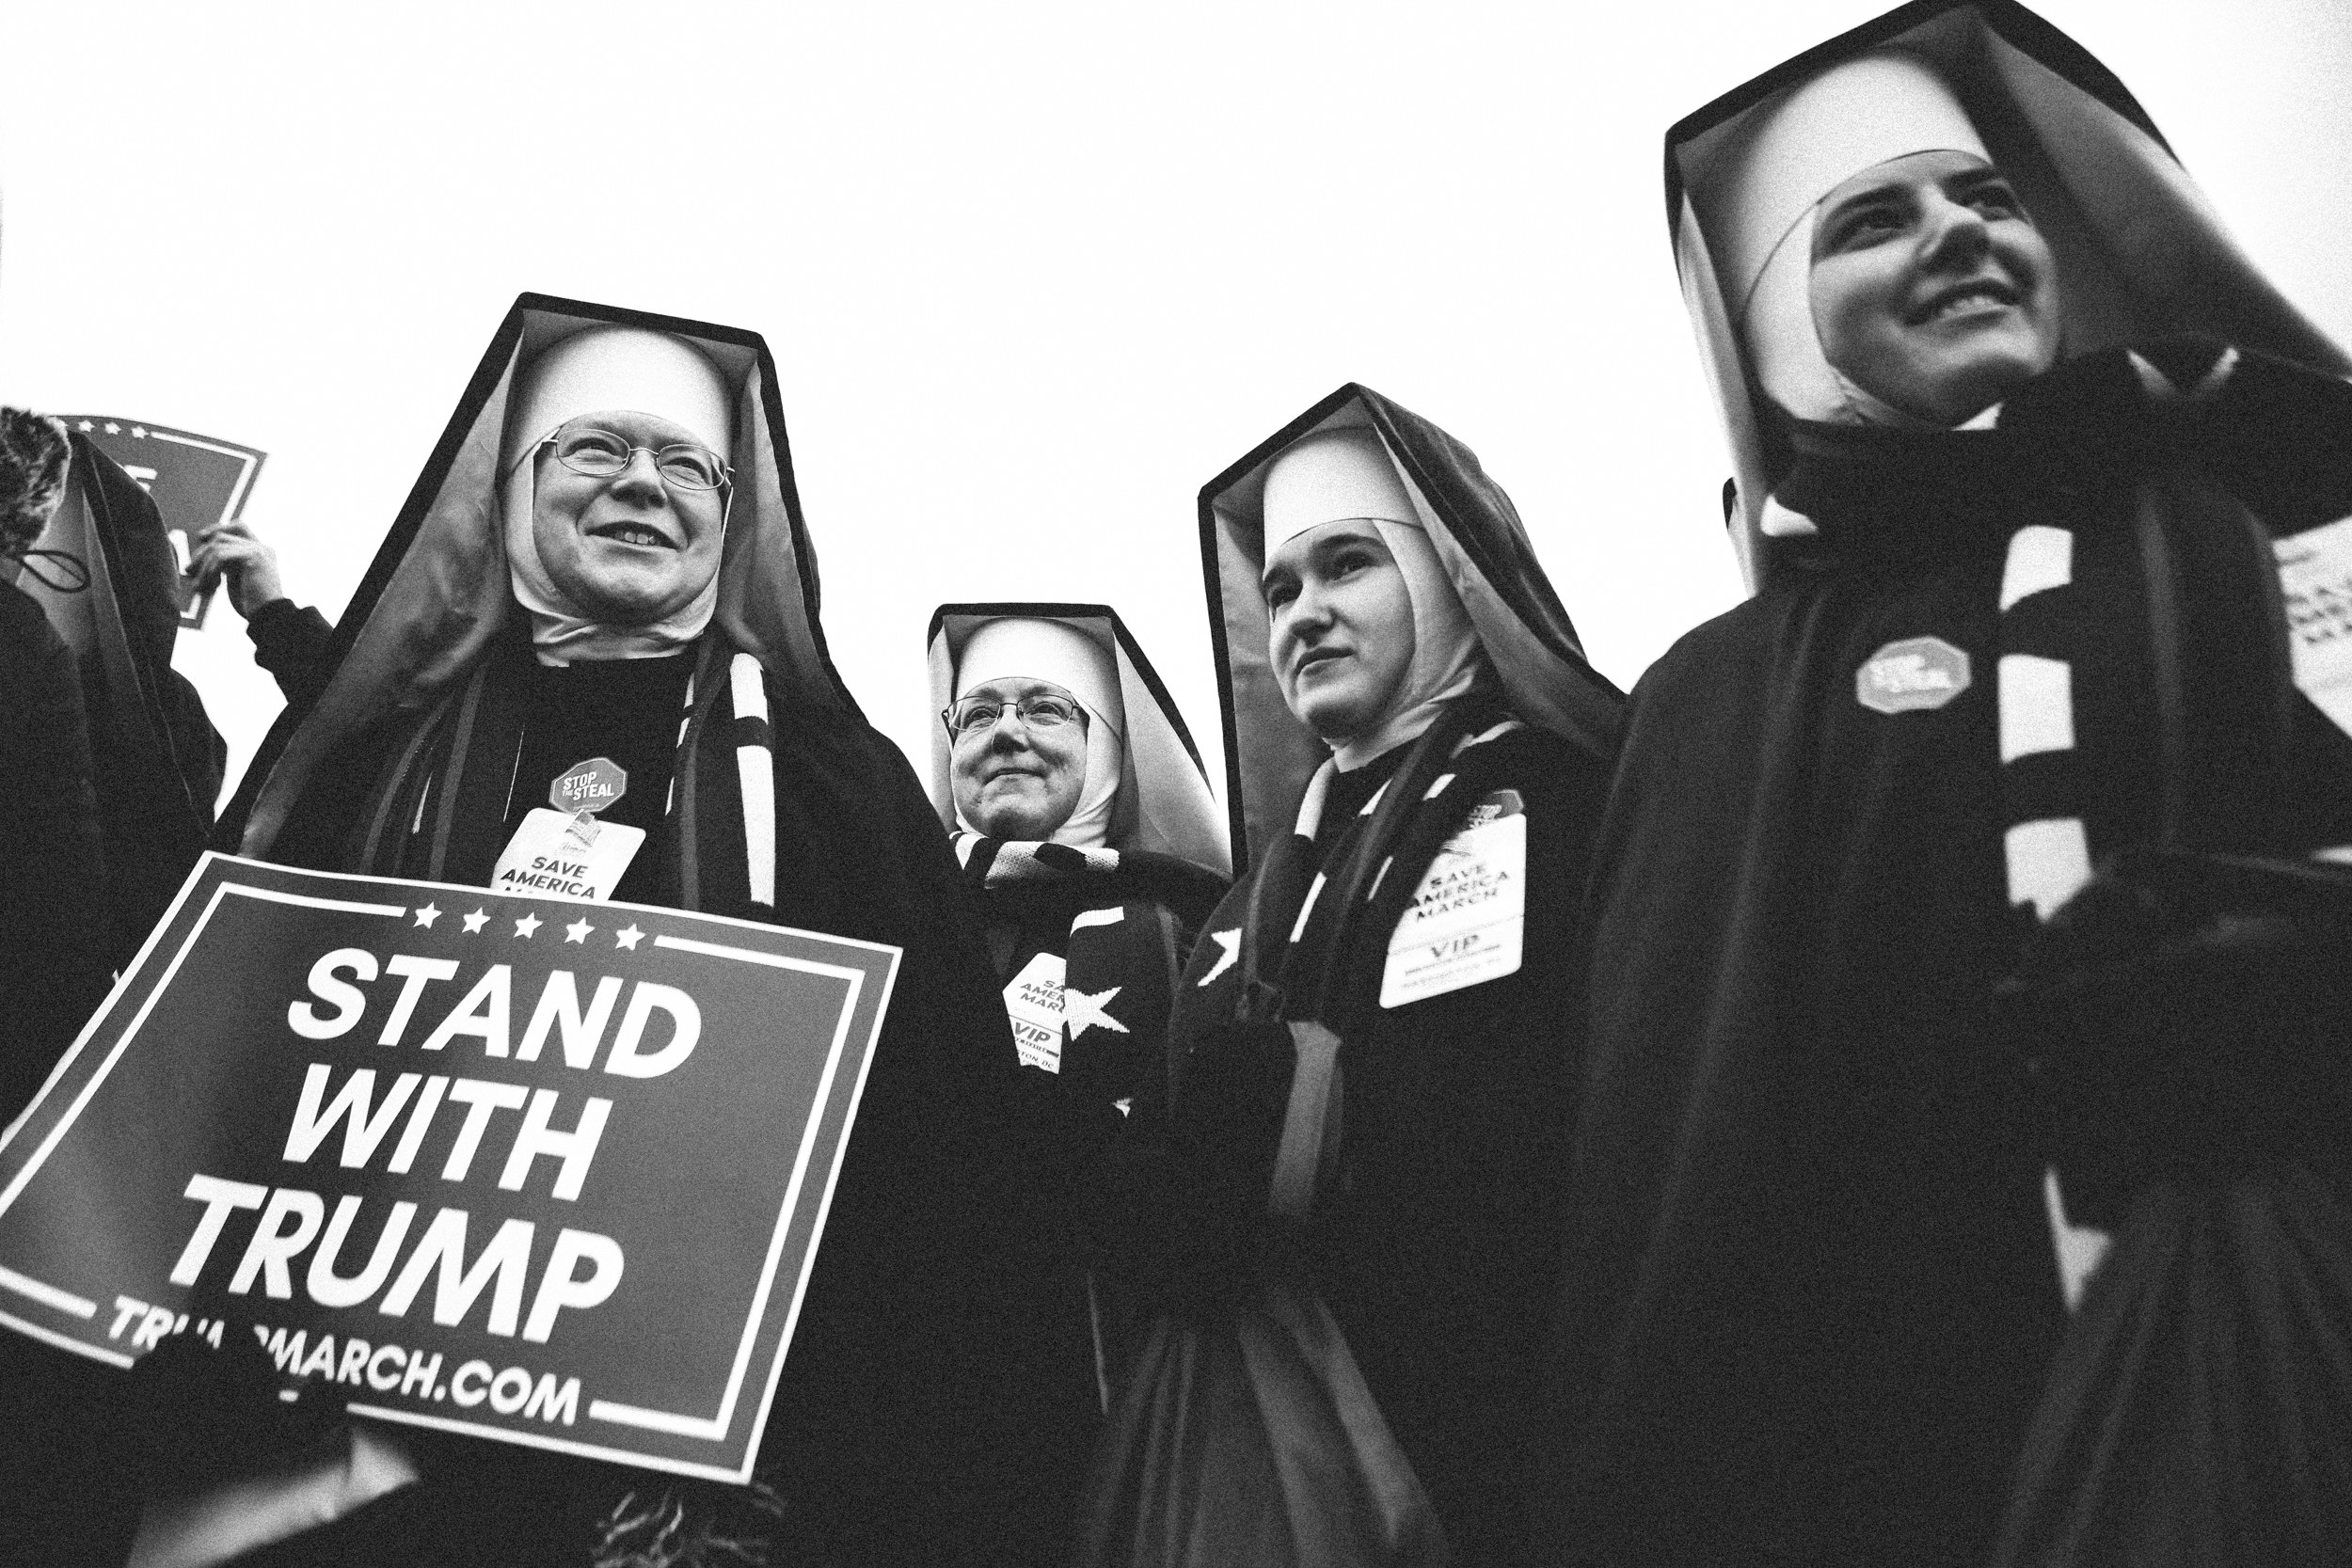 Four nuns in habits, one of them holding a sign that says &quot;stand with trump&quot;